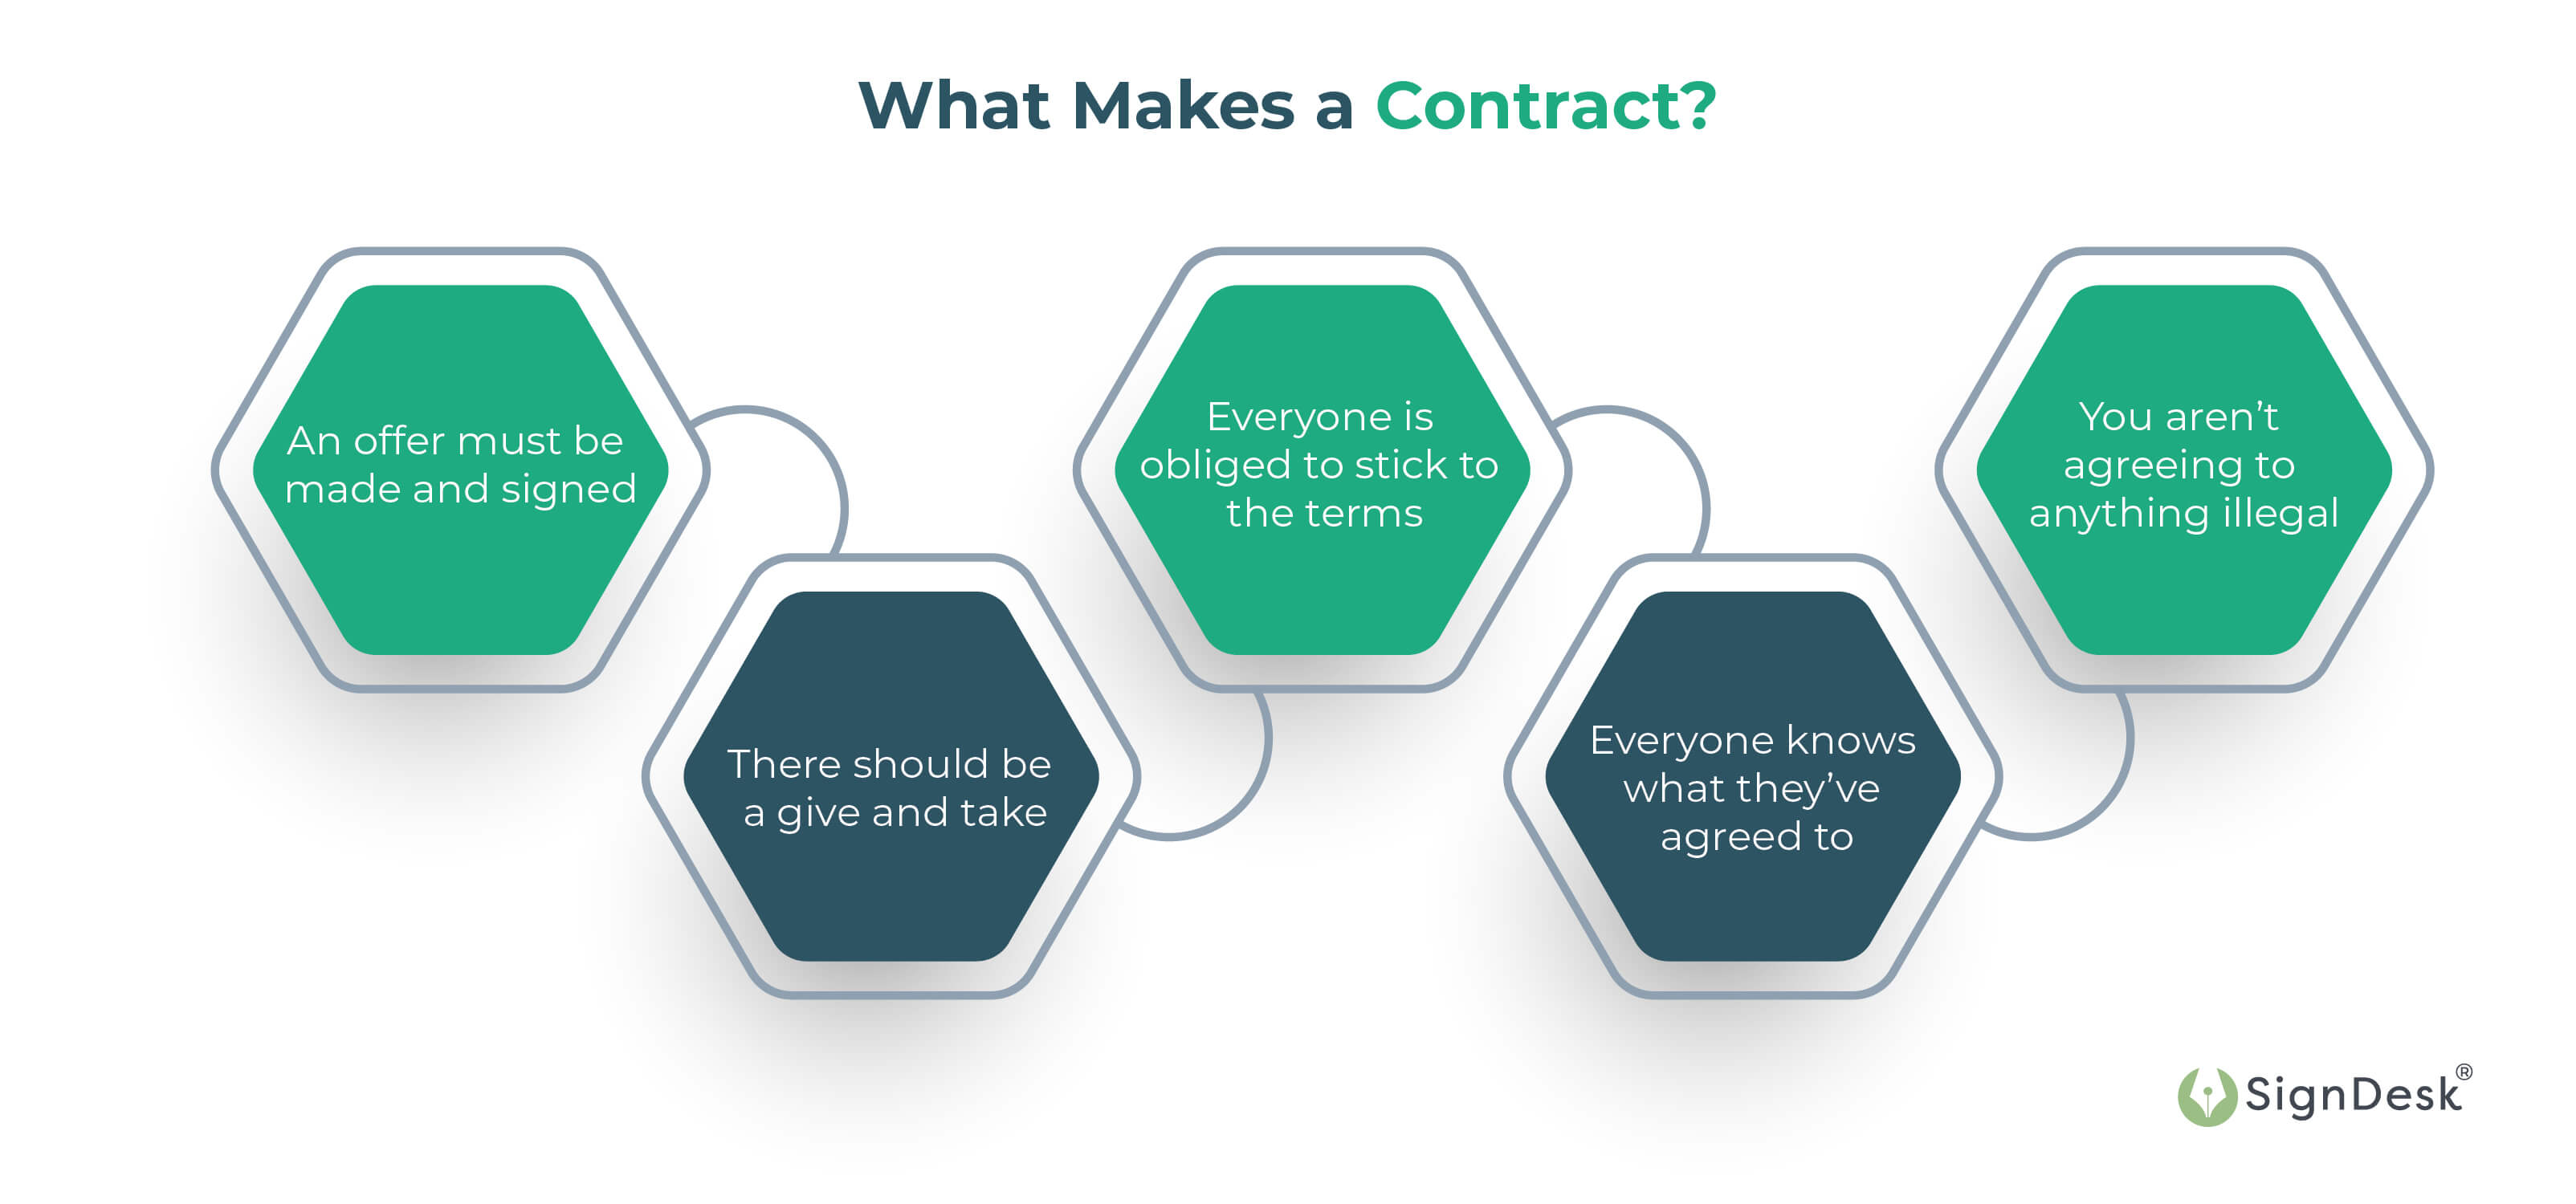 what makes a contract?